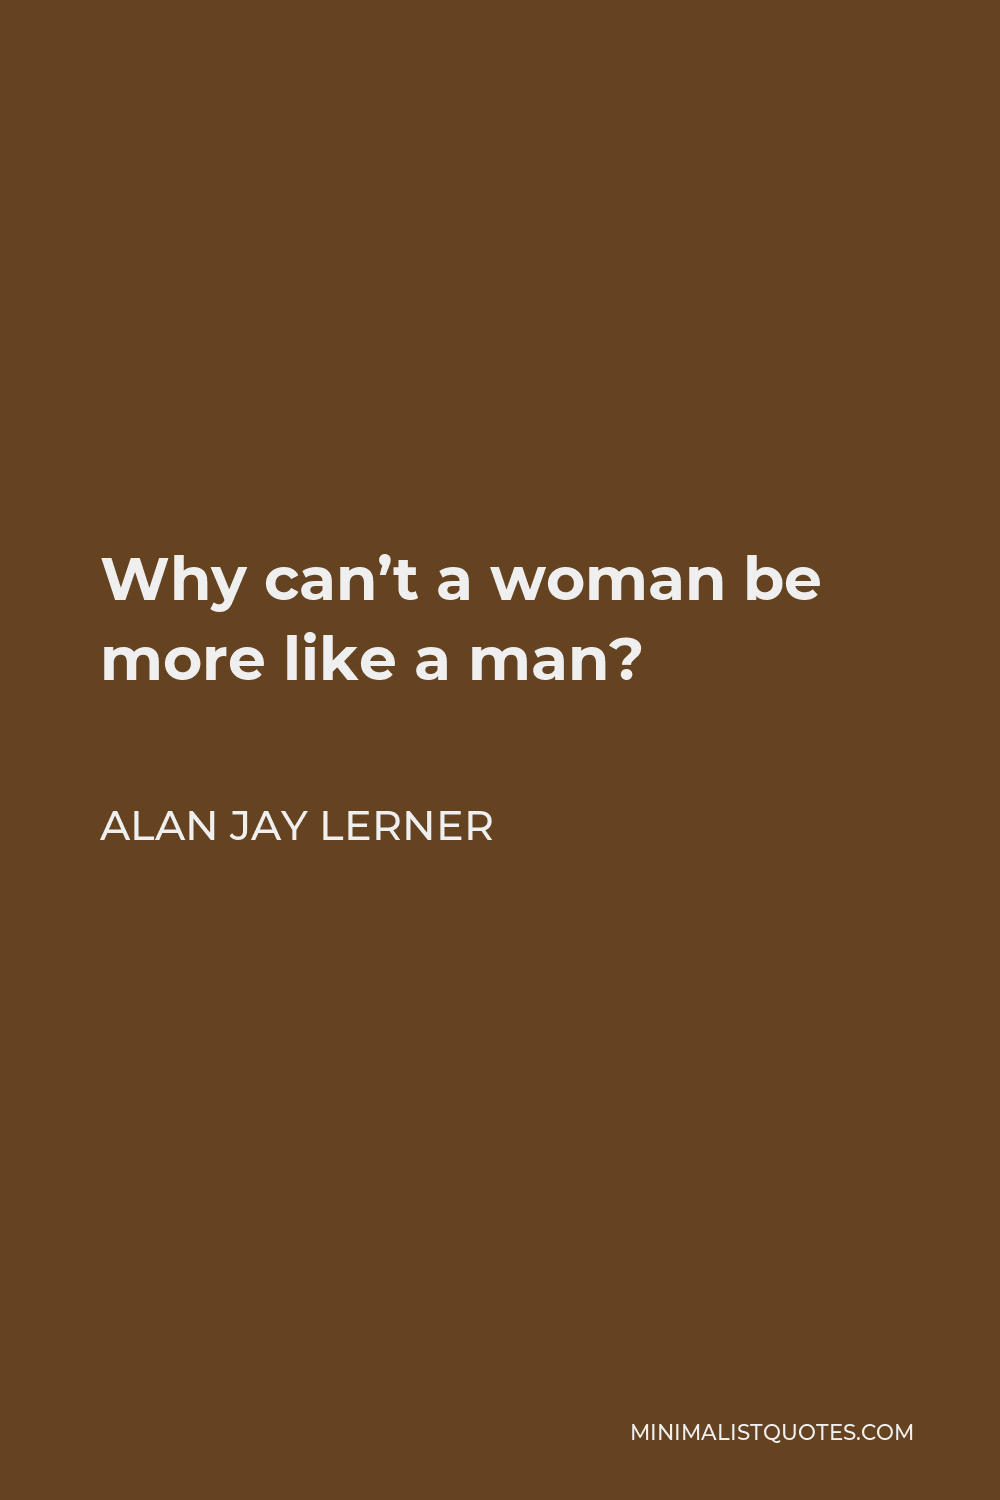 Alan Jay Lerner Quote - Why can’t a woman be more like a man?